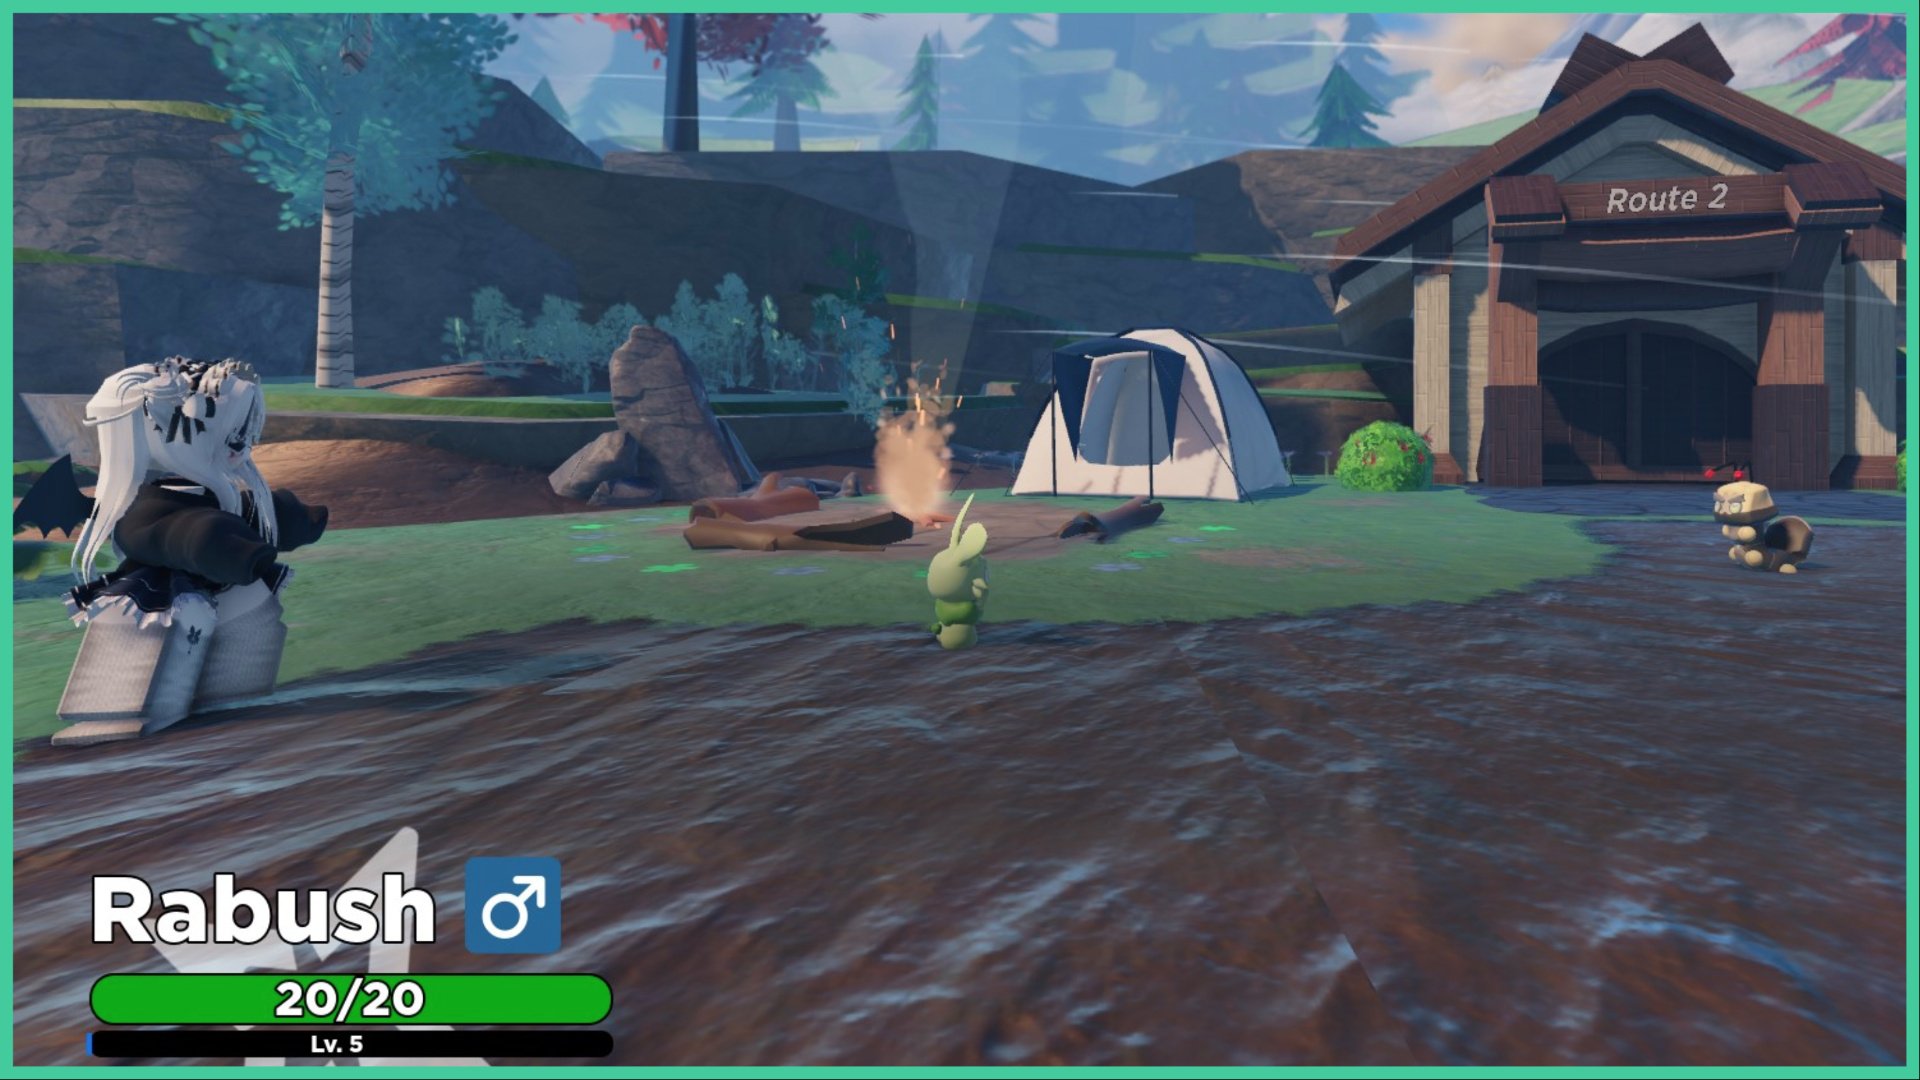 feature image for our shiny hunt starters in tales of tanorio guide, the image features a screenshot of a battle between rabush and another tanorian that looks like a worm made out of rocks, there is a small campsite in the background with a roaring fire, tend, and log benches, as well as a wooden building with a sign that reads 'route 2'